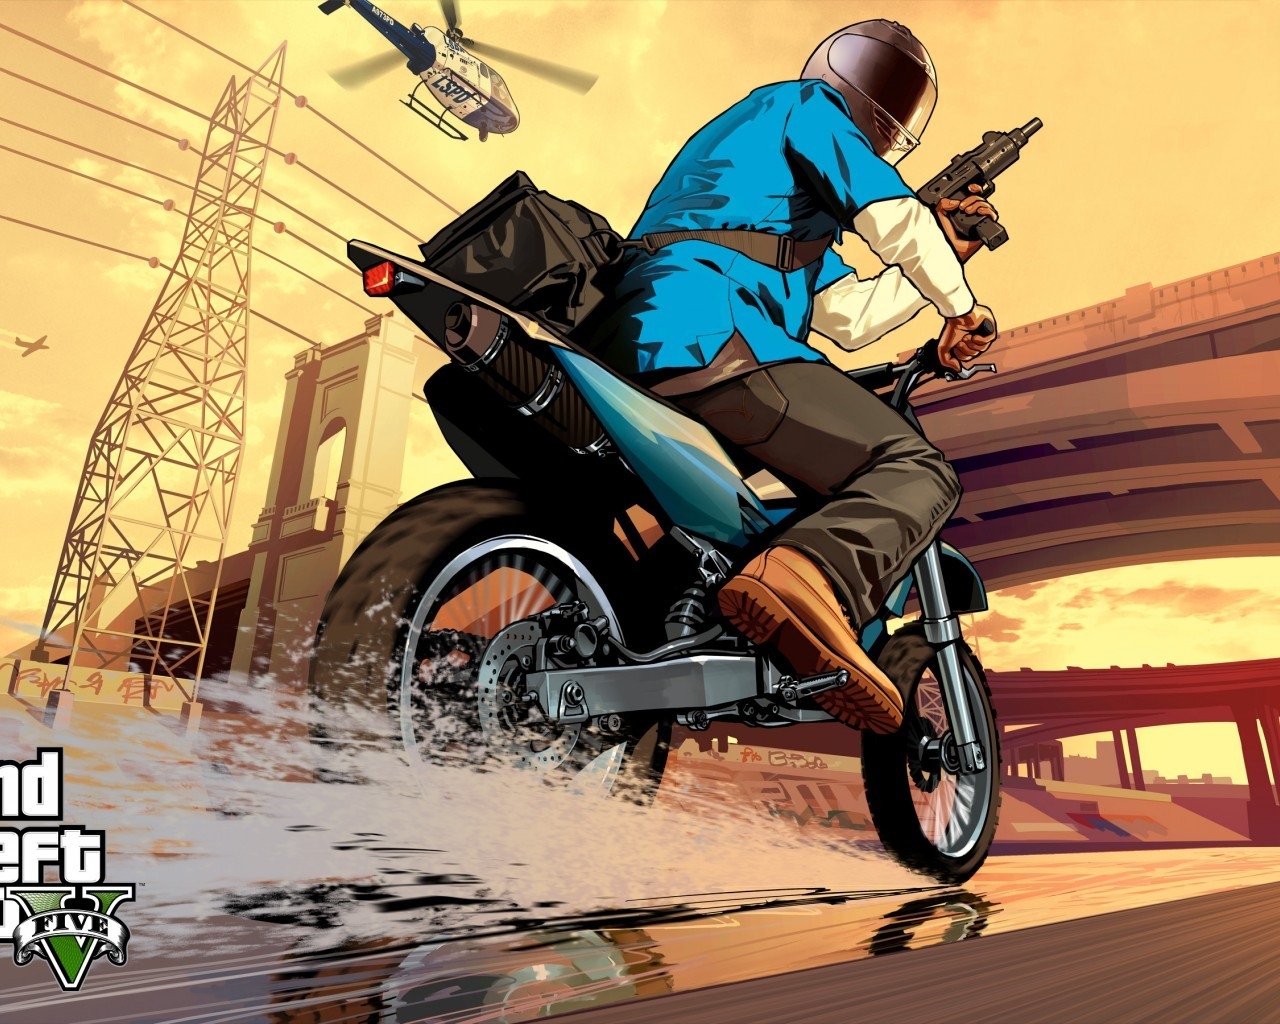 Grand Theft Auto V Poster for 1280 x 1024 resolution